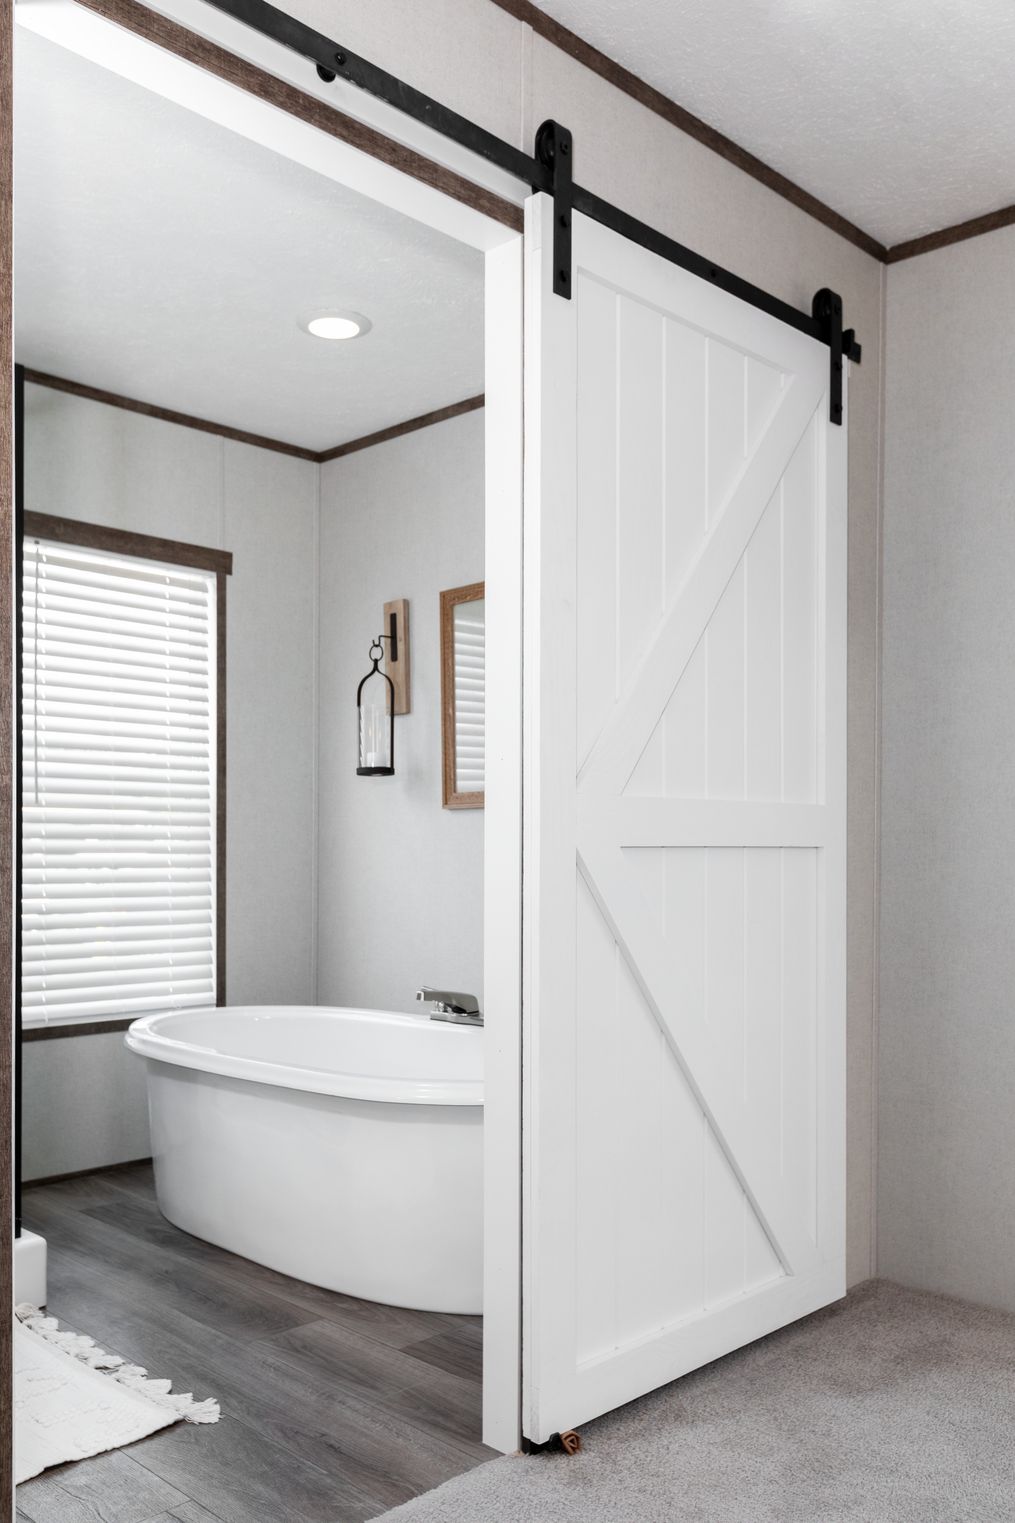 The PLATINUM ANNIVERSARY Master Bathroom. This Manufactured Mobile Home features 3 bedrooms and 2 baths.